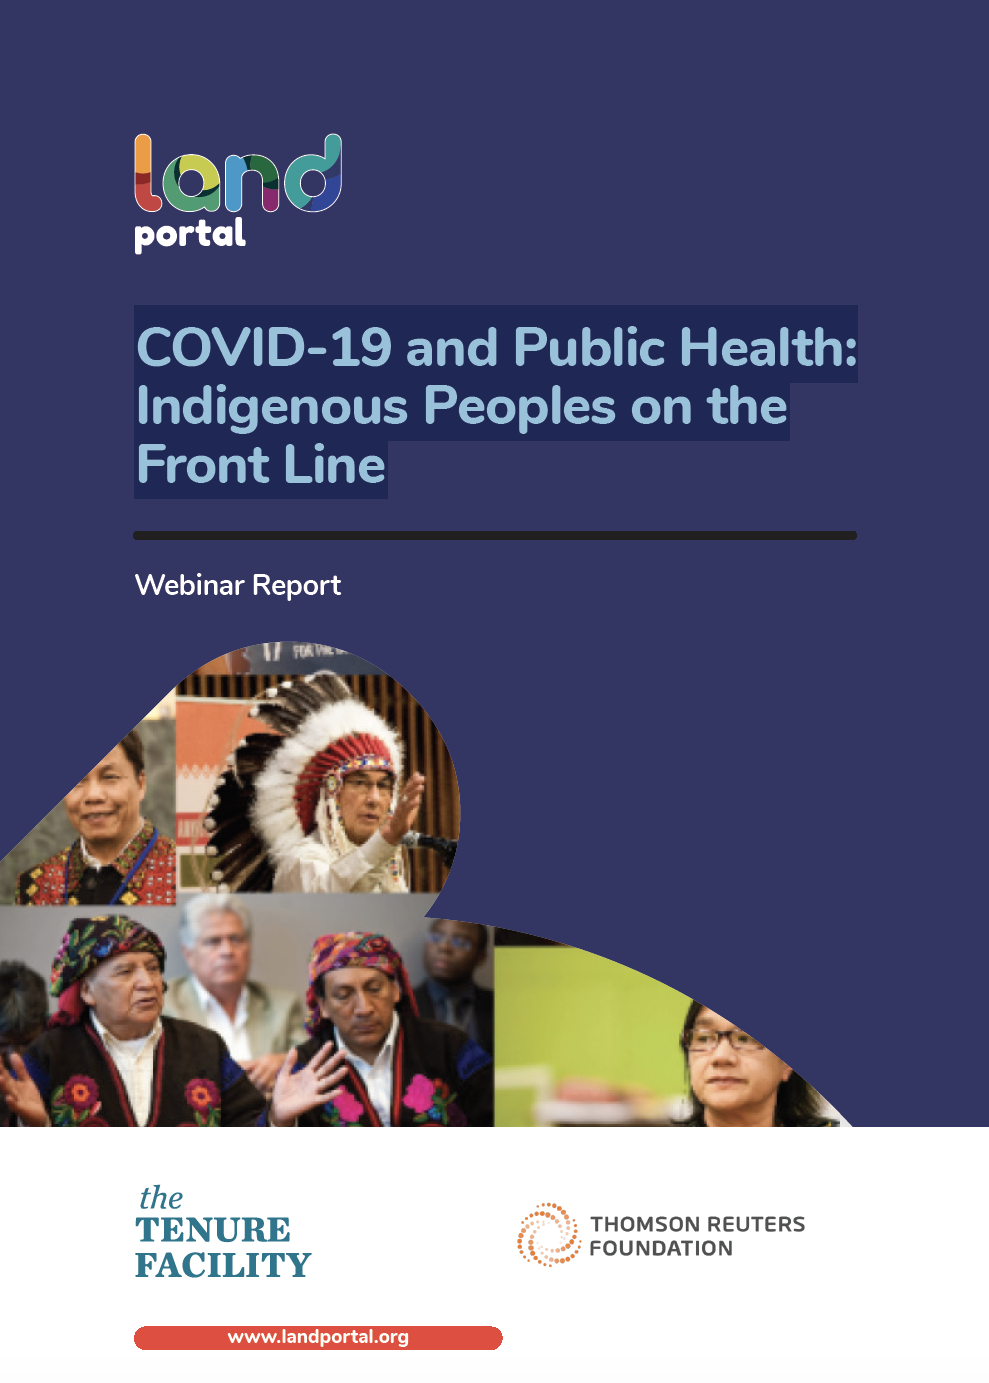 COVID-19 and Public Health: Indigenous Peoples on the Front Line